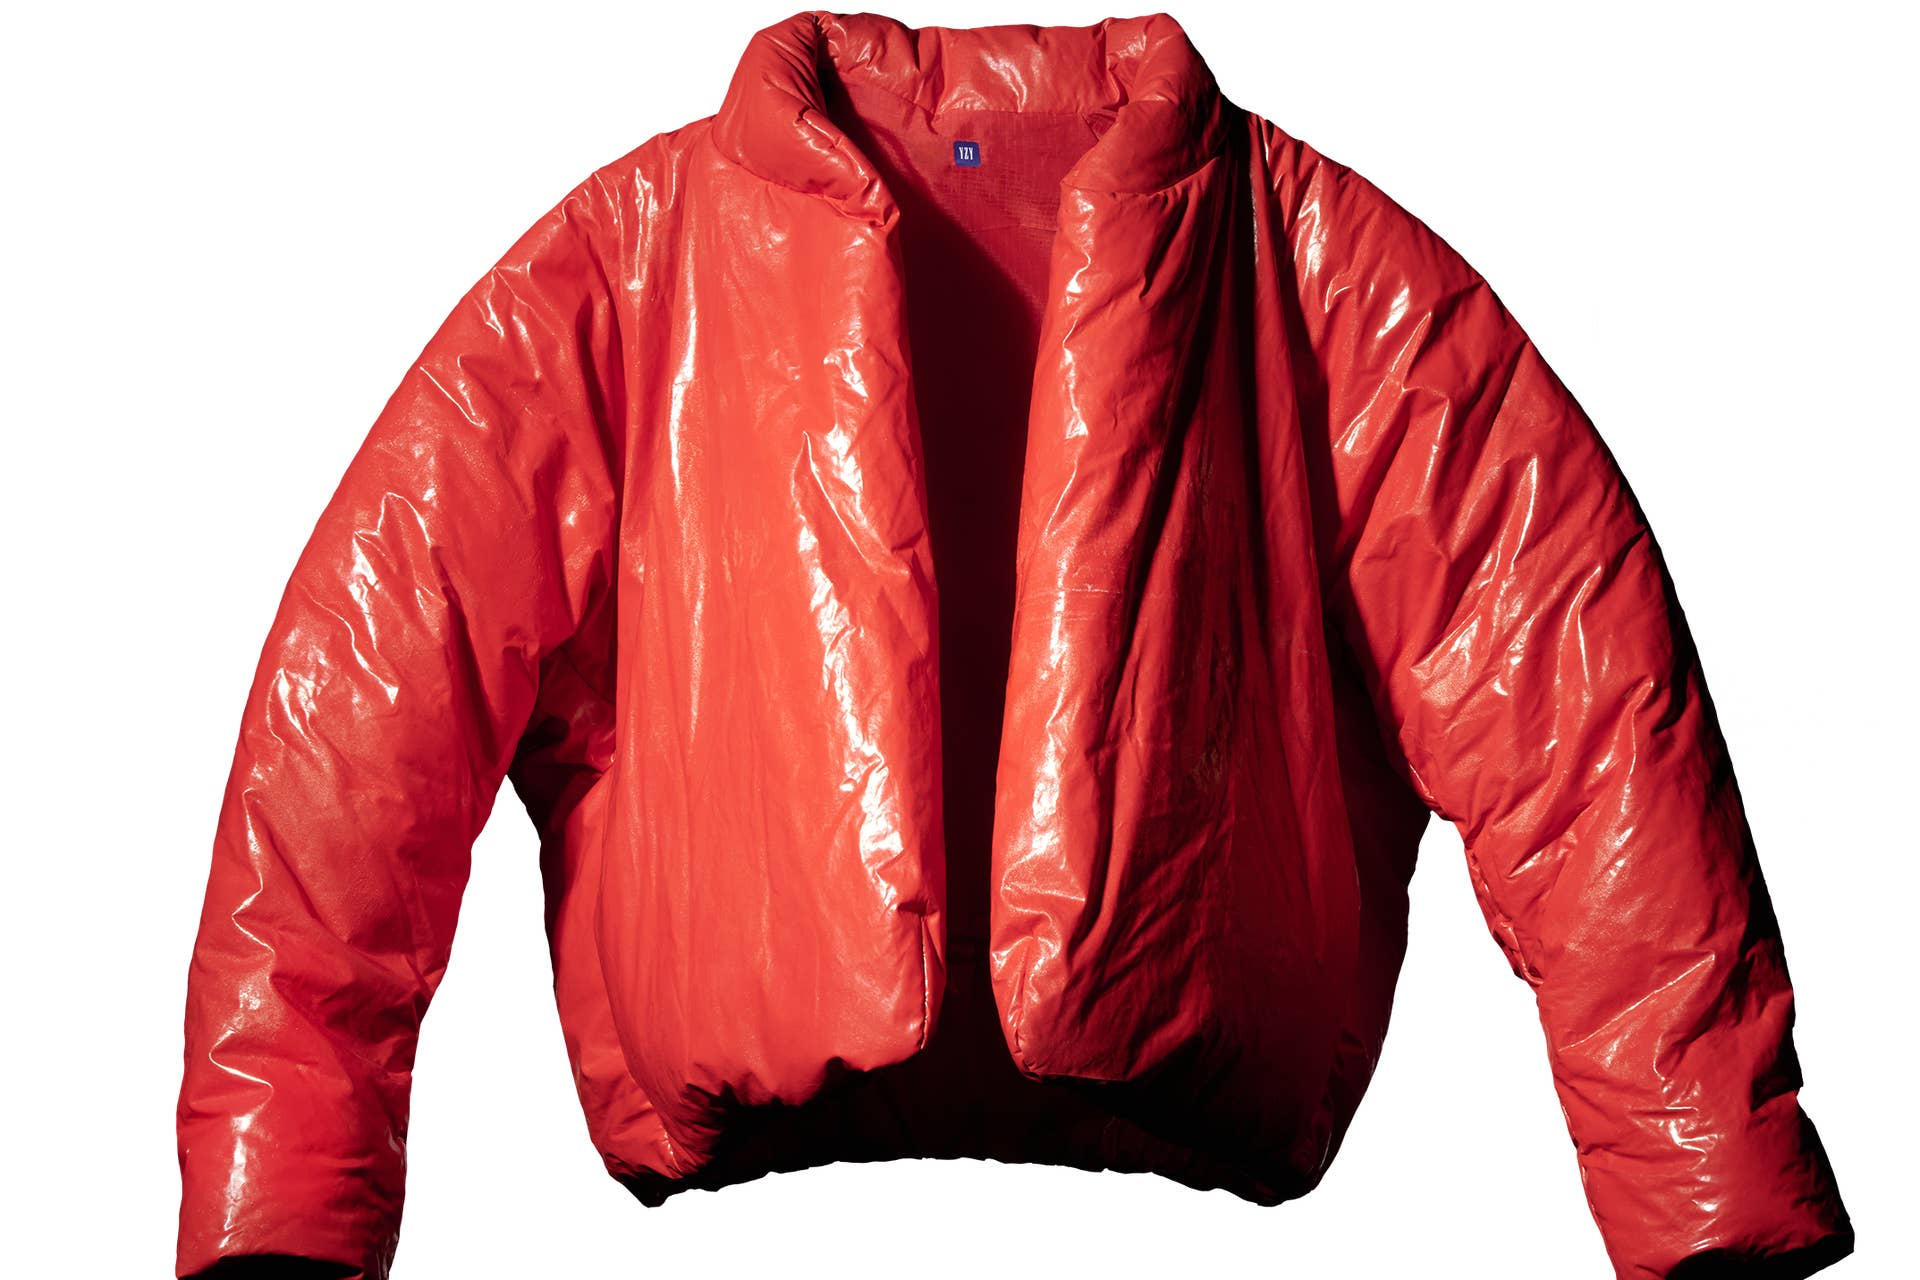 Kanye West Shares Pre-Order for Red Jacket From Yeezy Gap